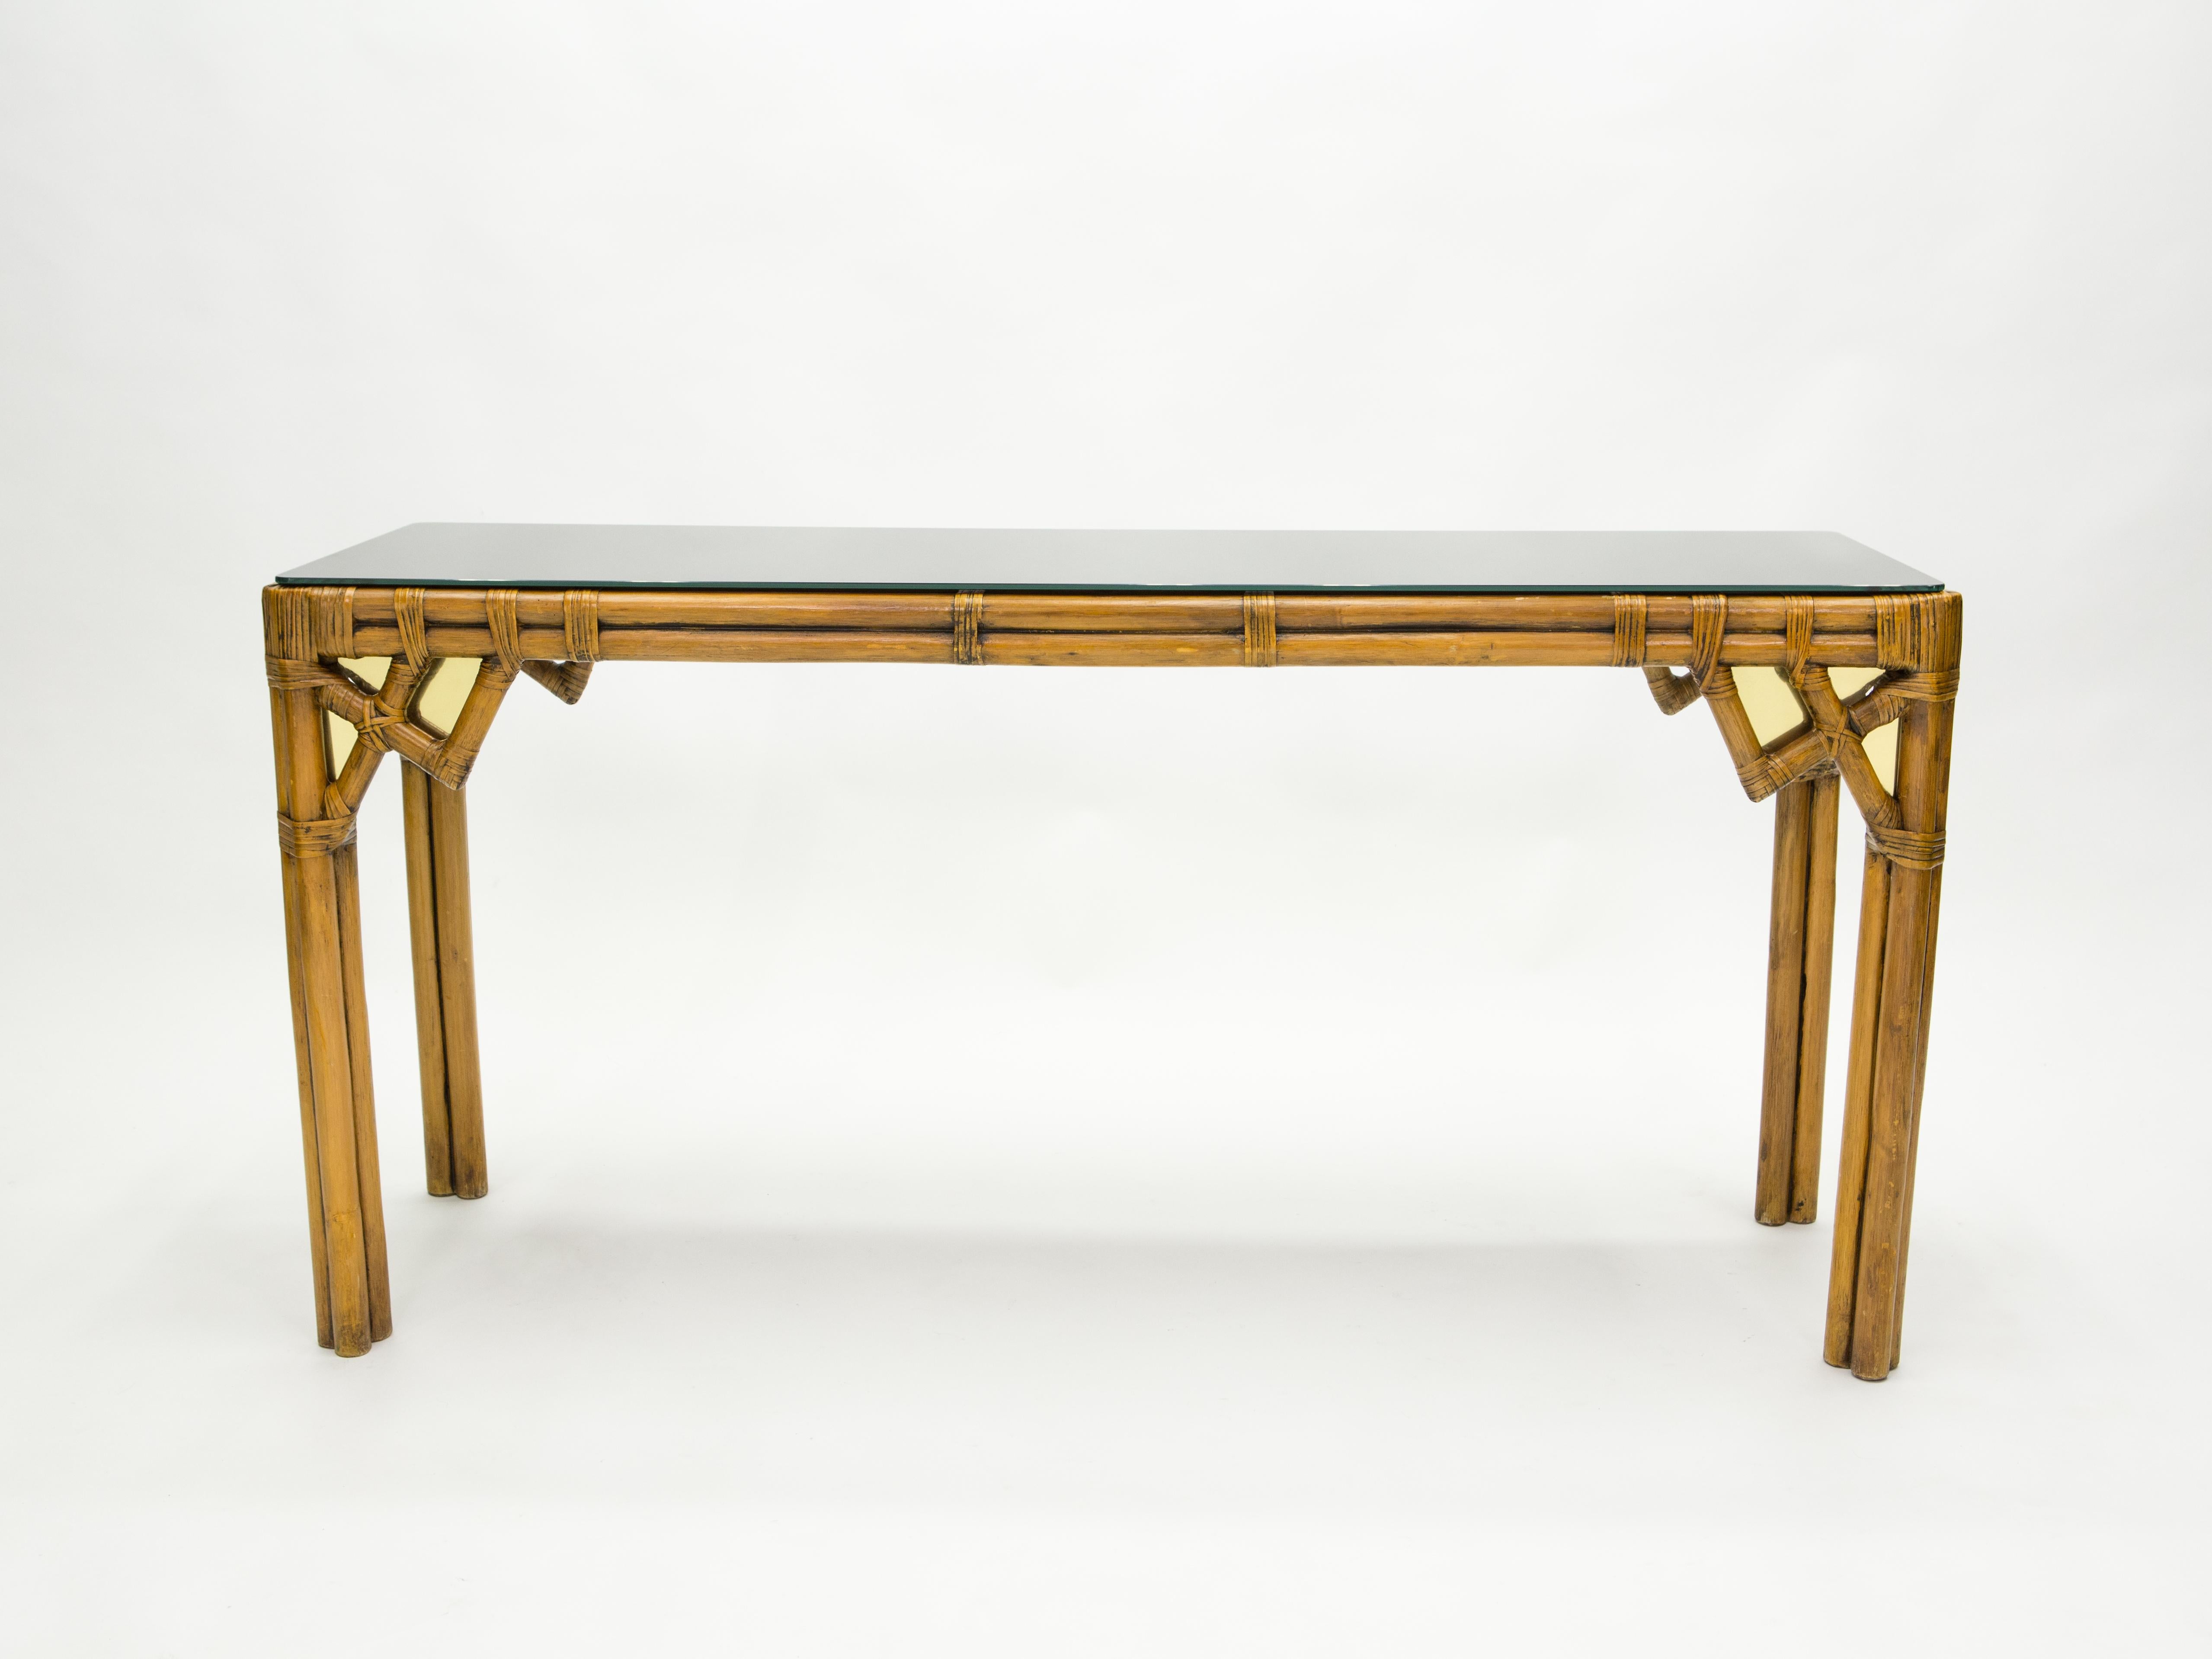 This beautiful console table was made from natural bamboo, with cane joints and luxe displays of brass inserts on the front and side, in the early 1970s in Italy. It features a slick black opaline glass top. The piece was designed from the